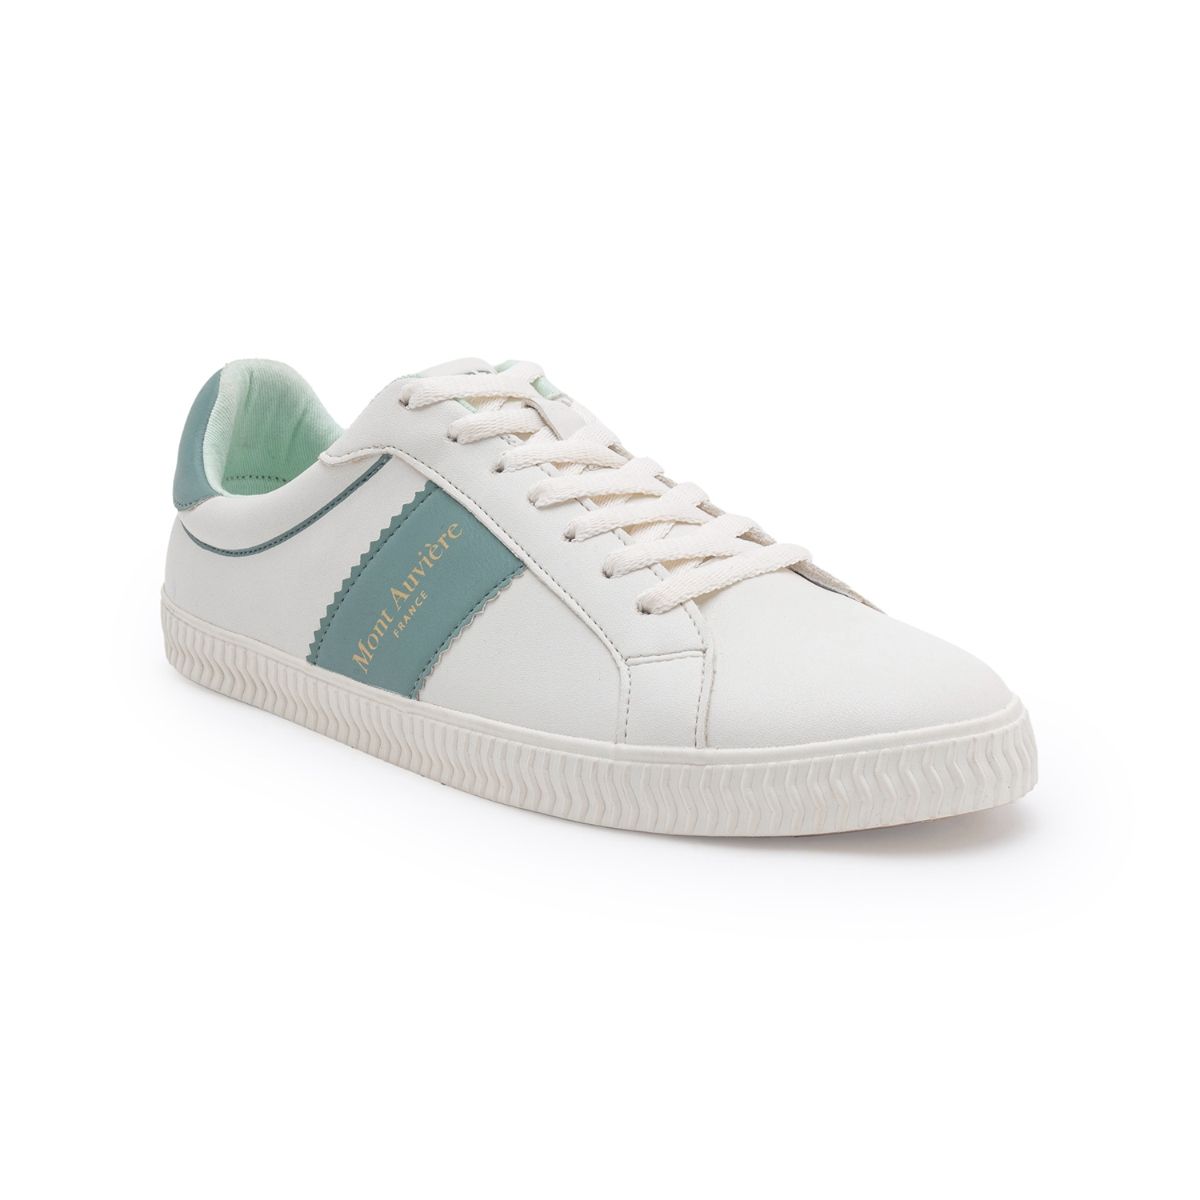 Lacoste Mens Shoe - Get Best Price from Manufacturers & Suppliers in India